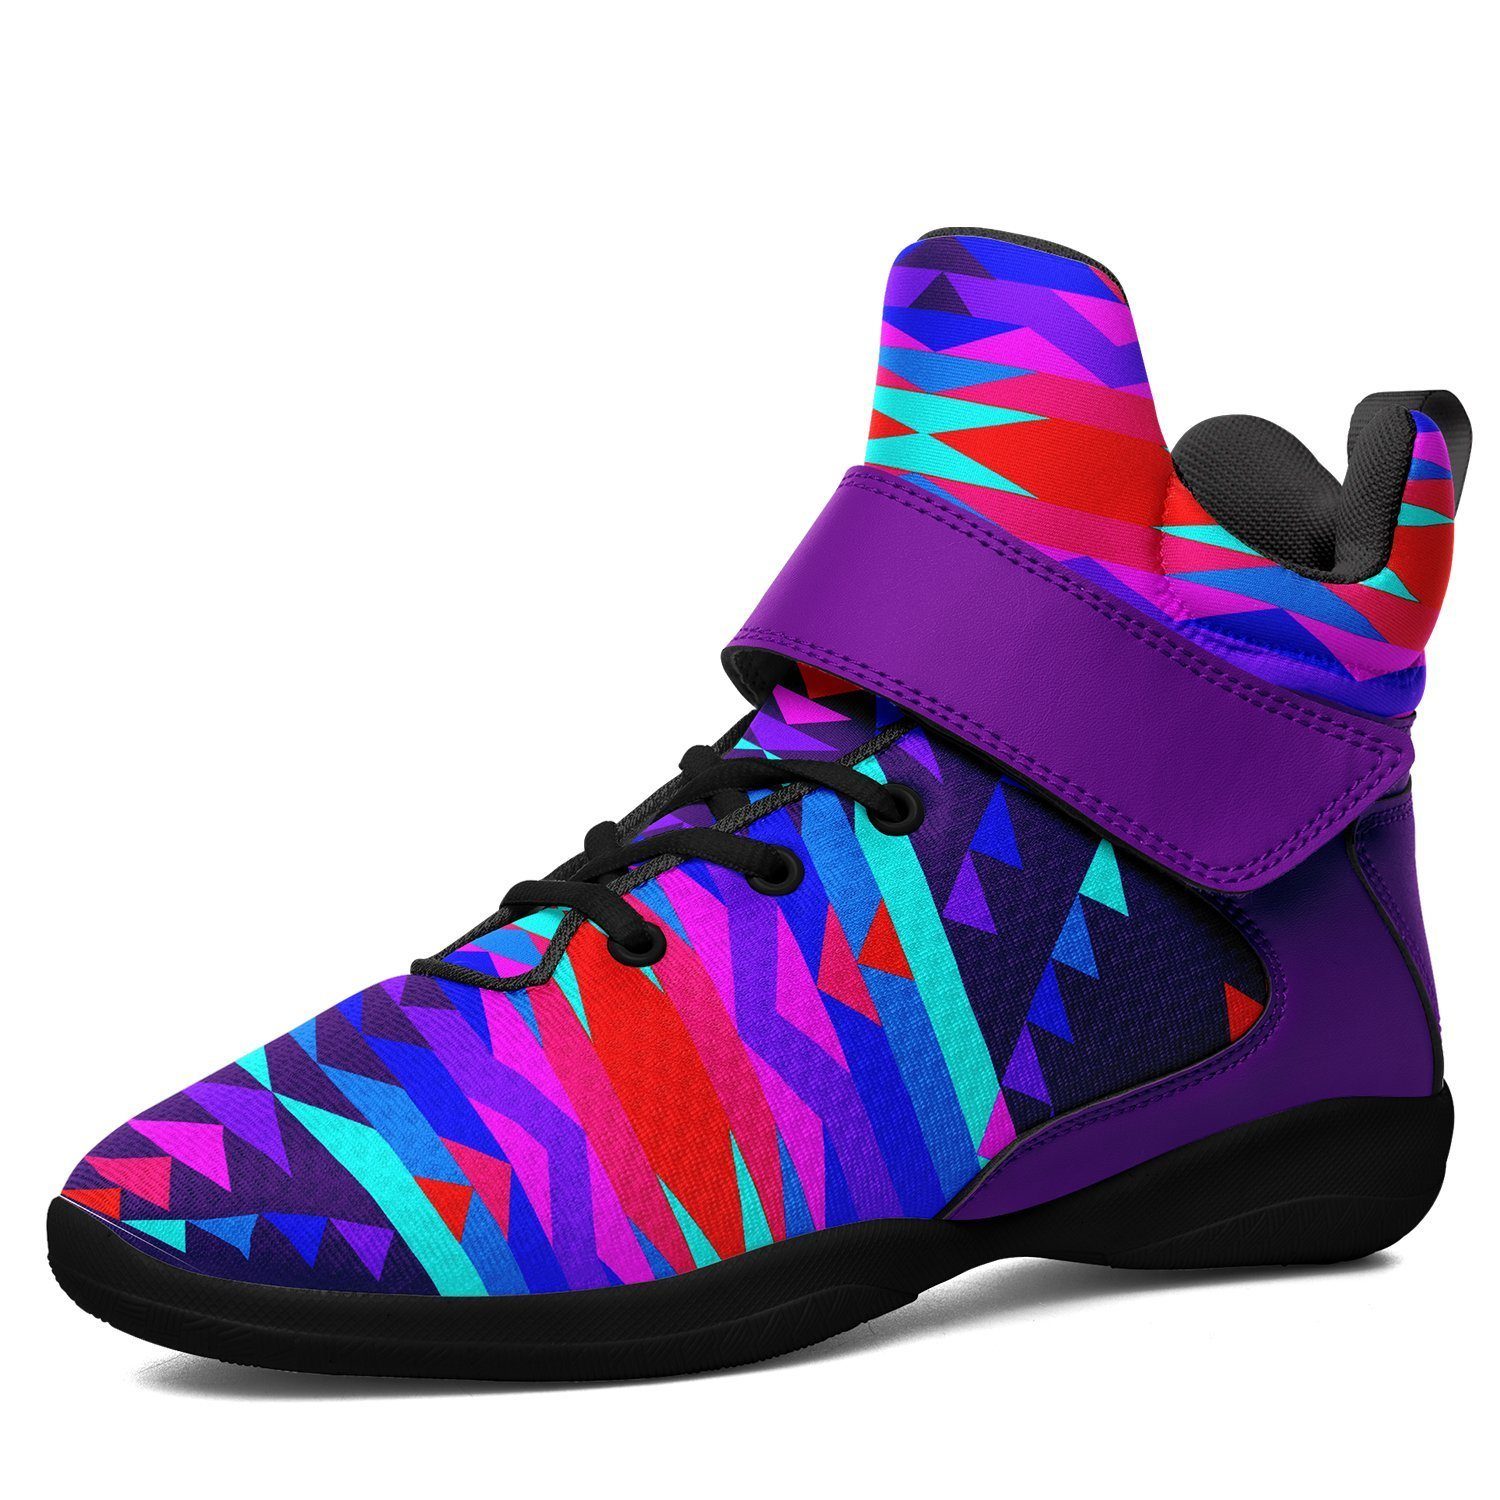 Visions of Peace Ipottaa Basketball / Sport High Top Shoes - Black Sole 49 Dzine US Men 7 / EUR 40 Black Sole with Indigo Strap 